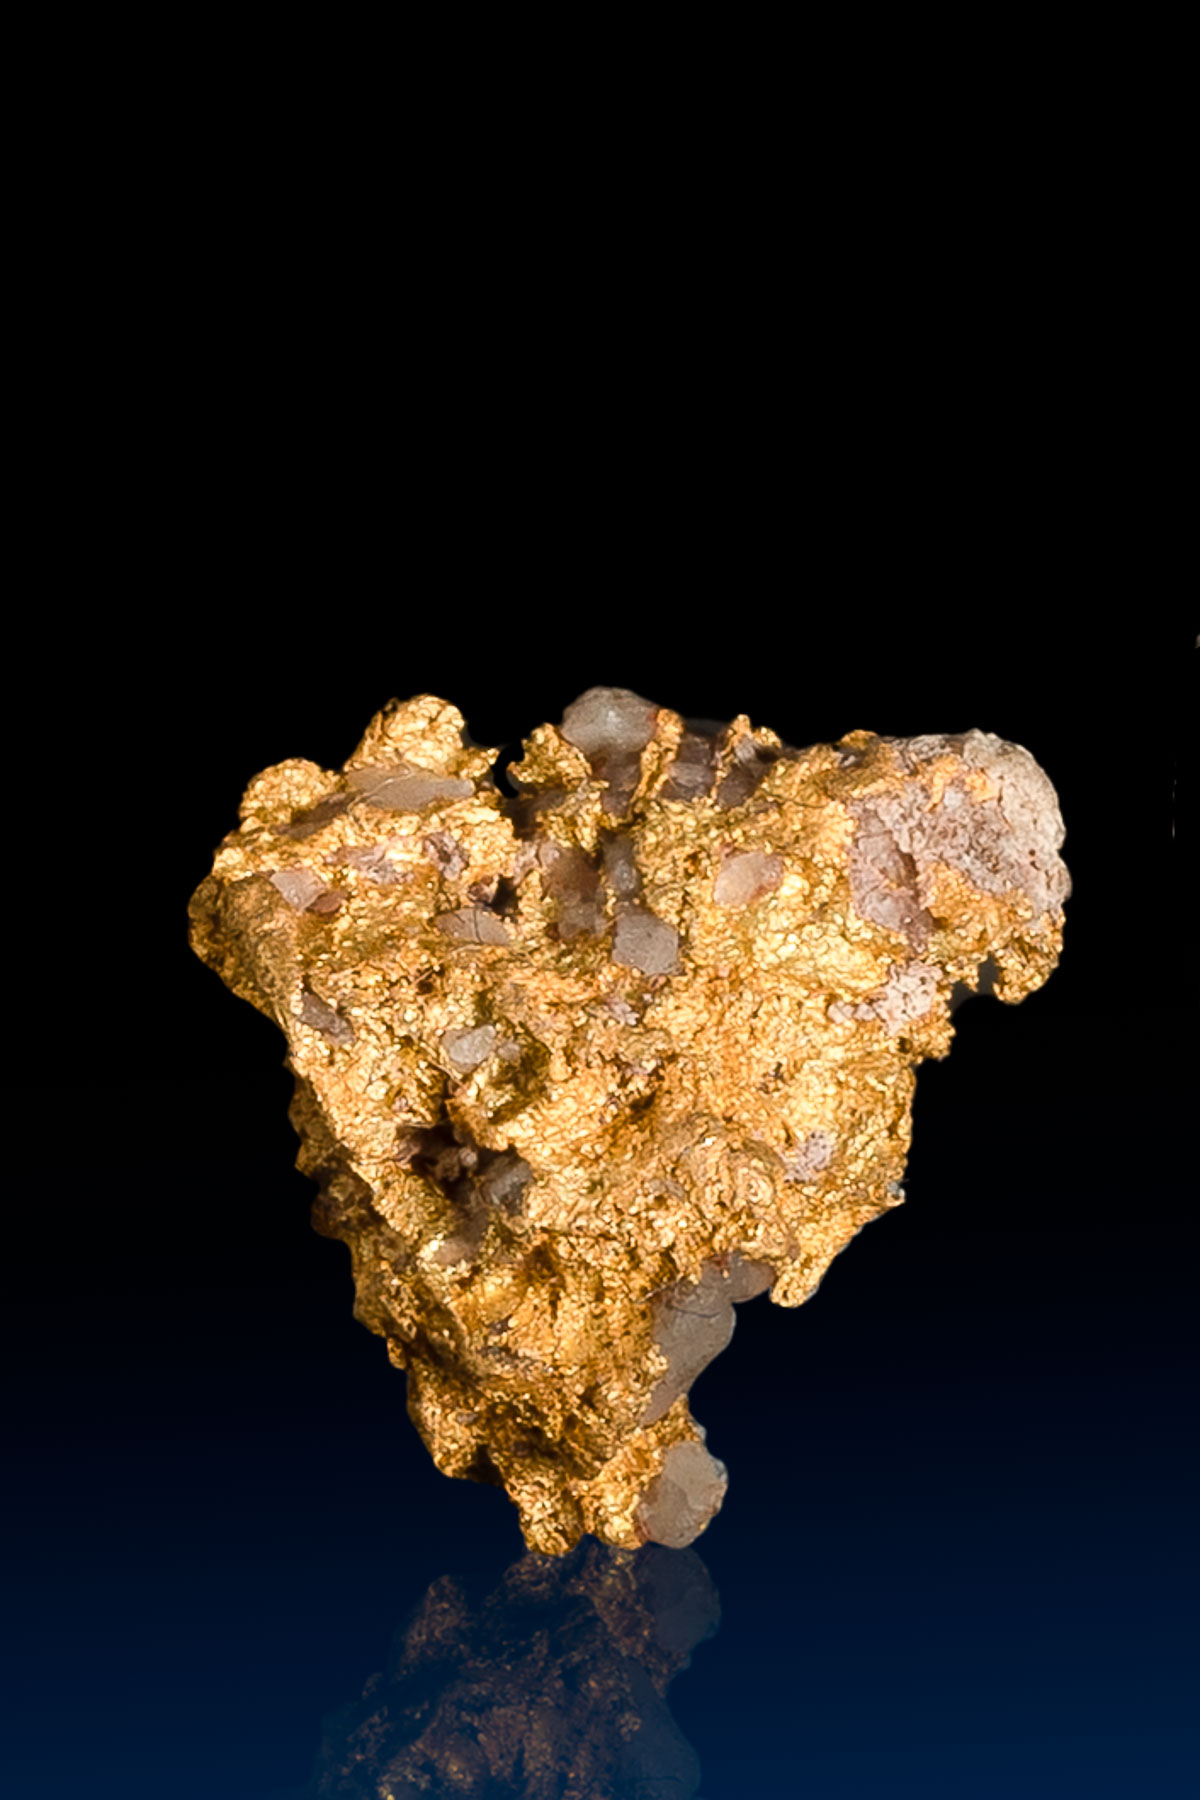 Quartz Surrounded by Gold Arizona Nugget - 2.40 grams